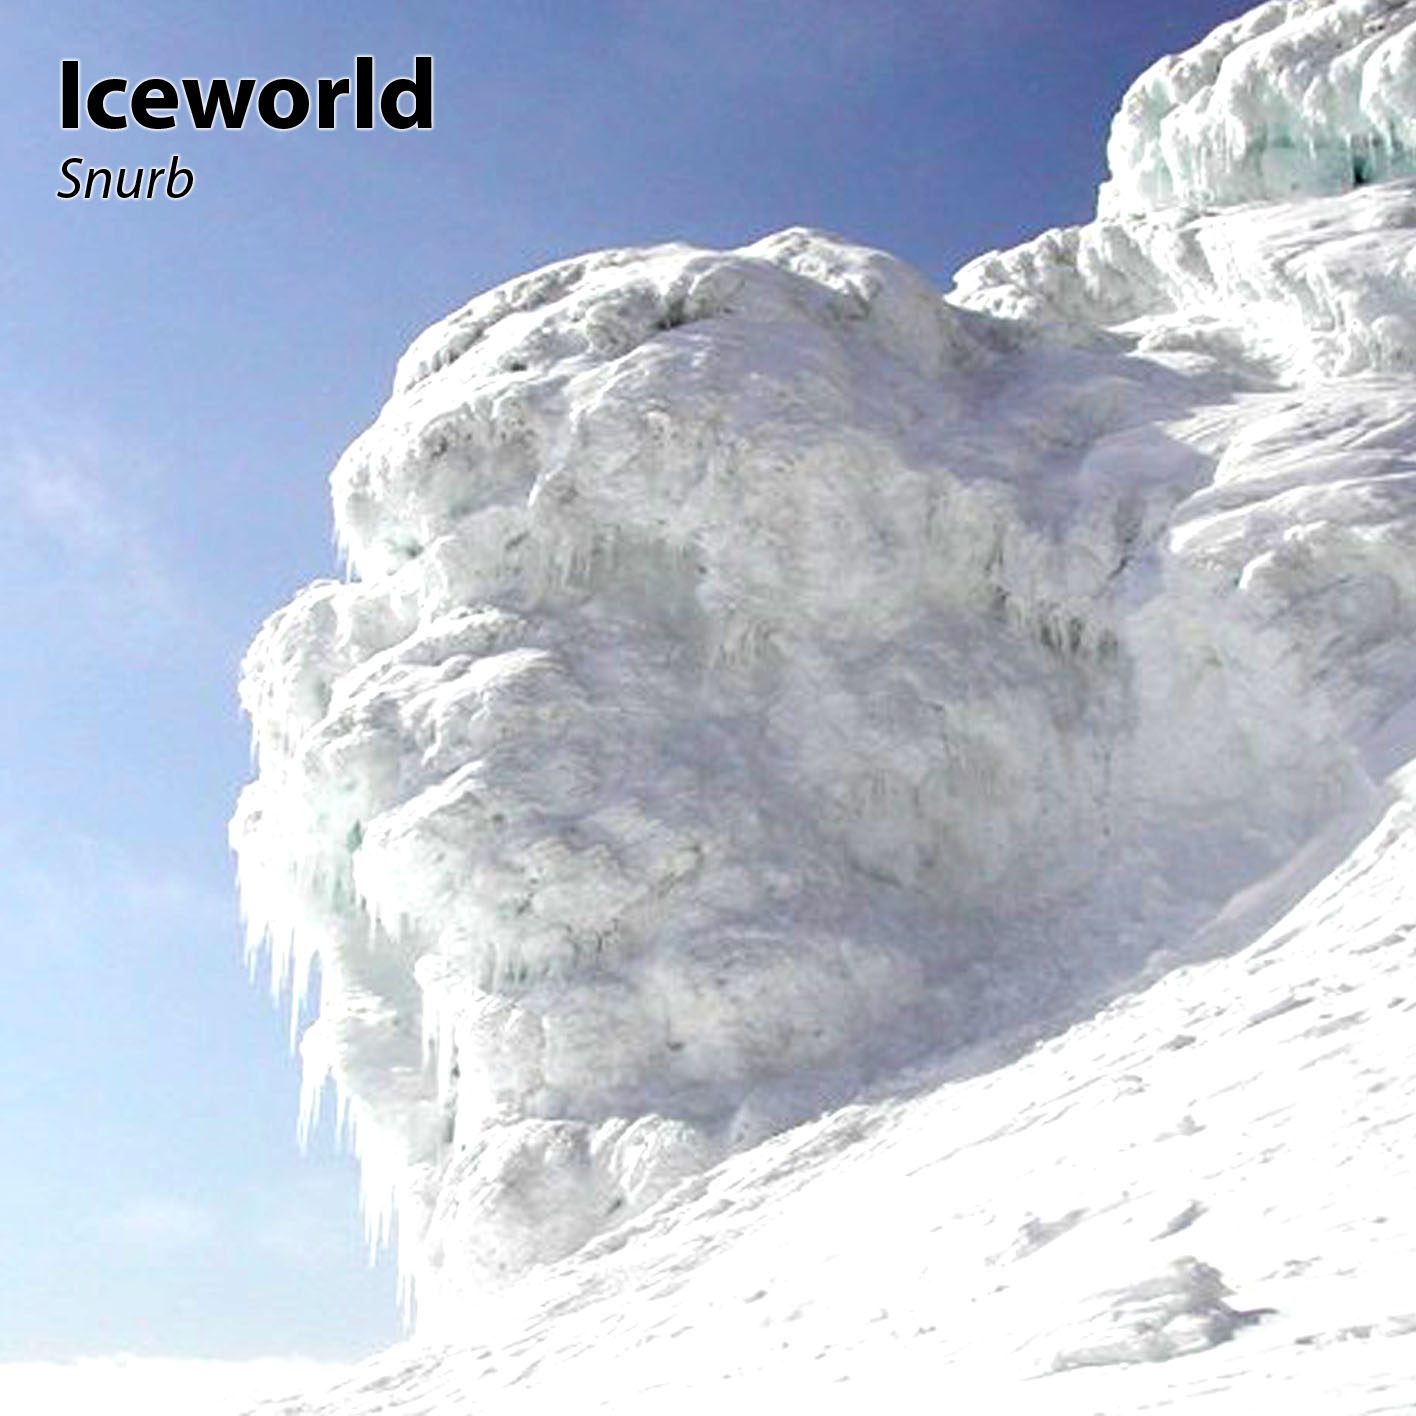 Iceworld front cover